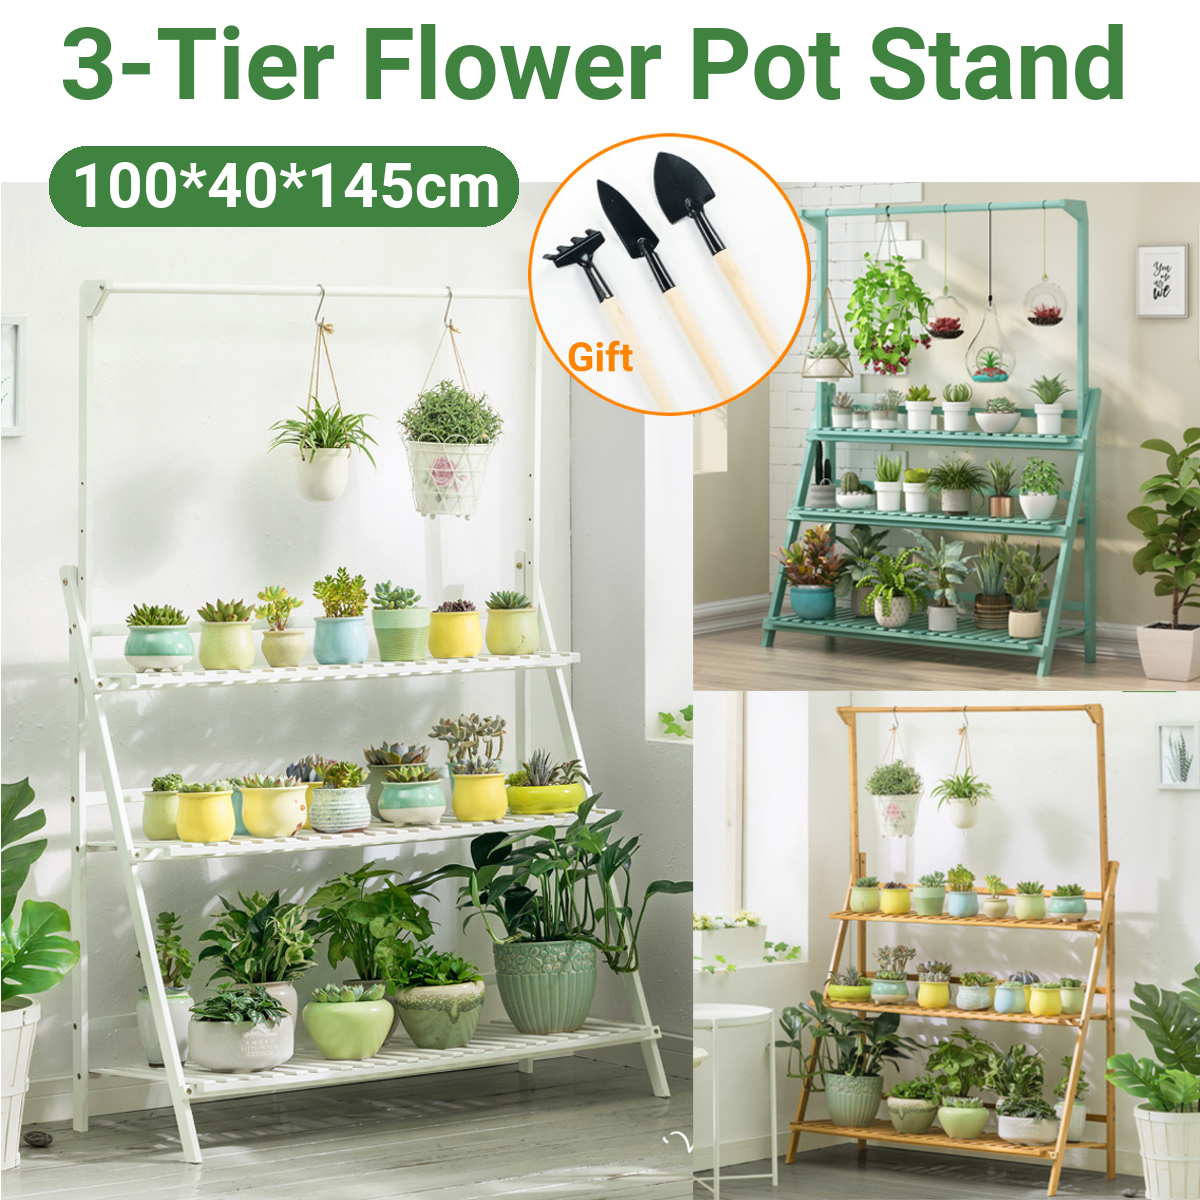 3-tier-Height-Adjustable-Foldable-Stair-floor-Flower-Pot-Stands-Rack-with-Removable-Pot-Hanging-Bar--1786440-1